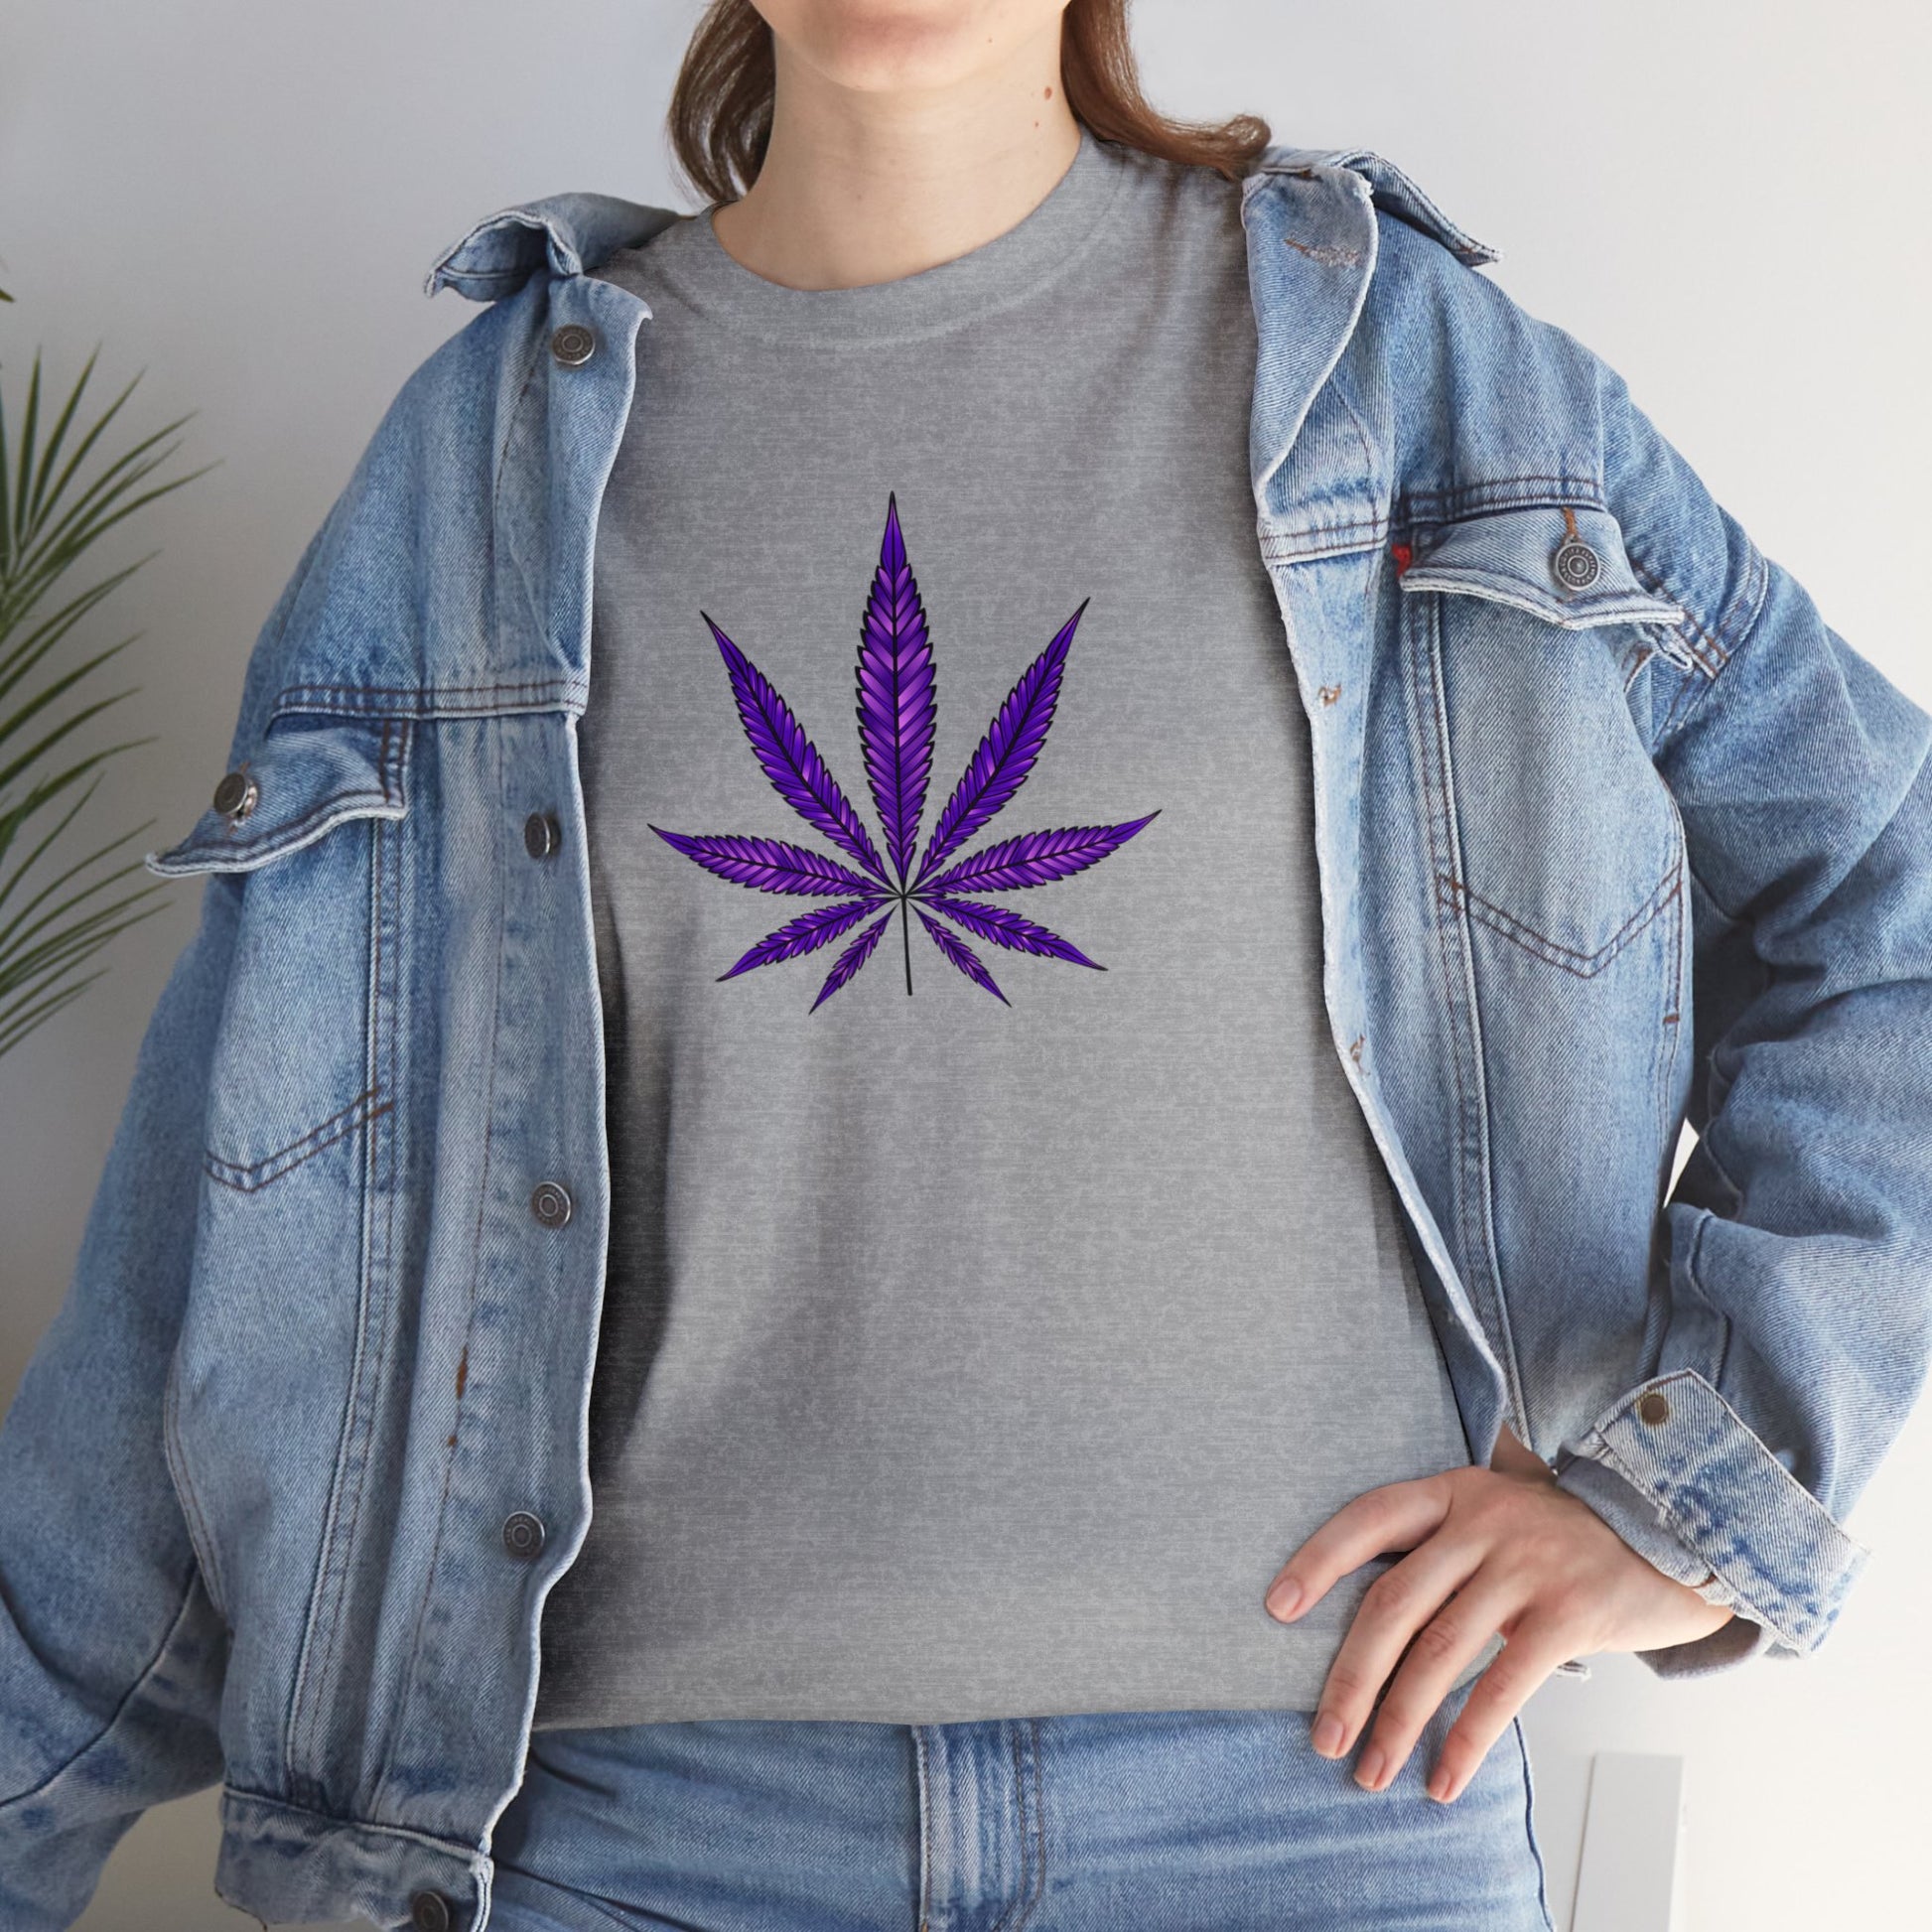 Sentence with Product Name: A person wearing a denim jacket over a vibrant color Purple Cannabis Leaf Tee, embracing marijuana culture.